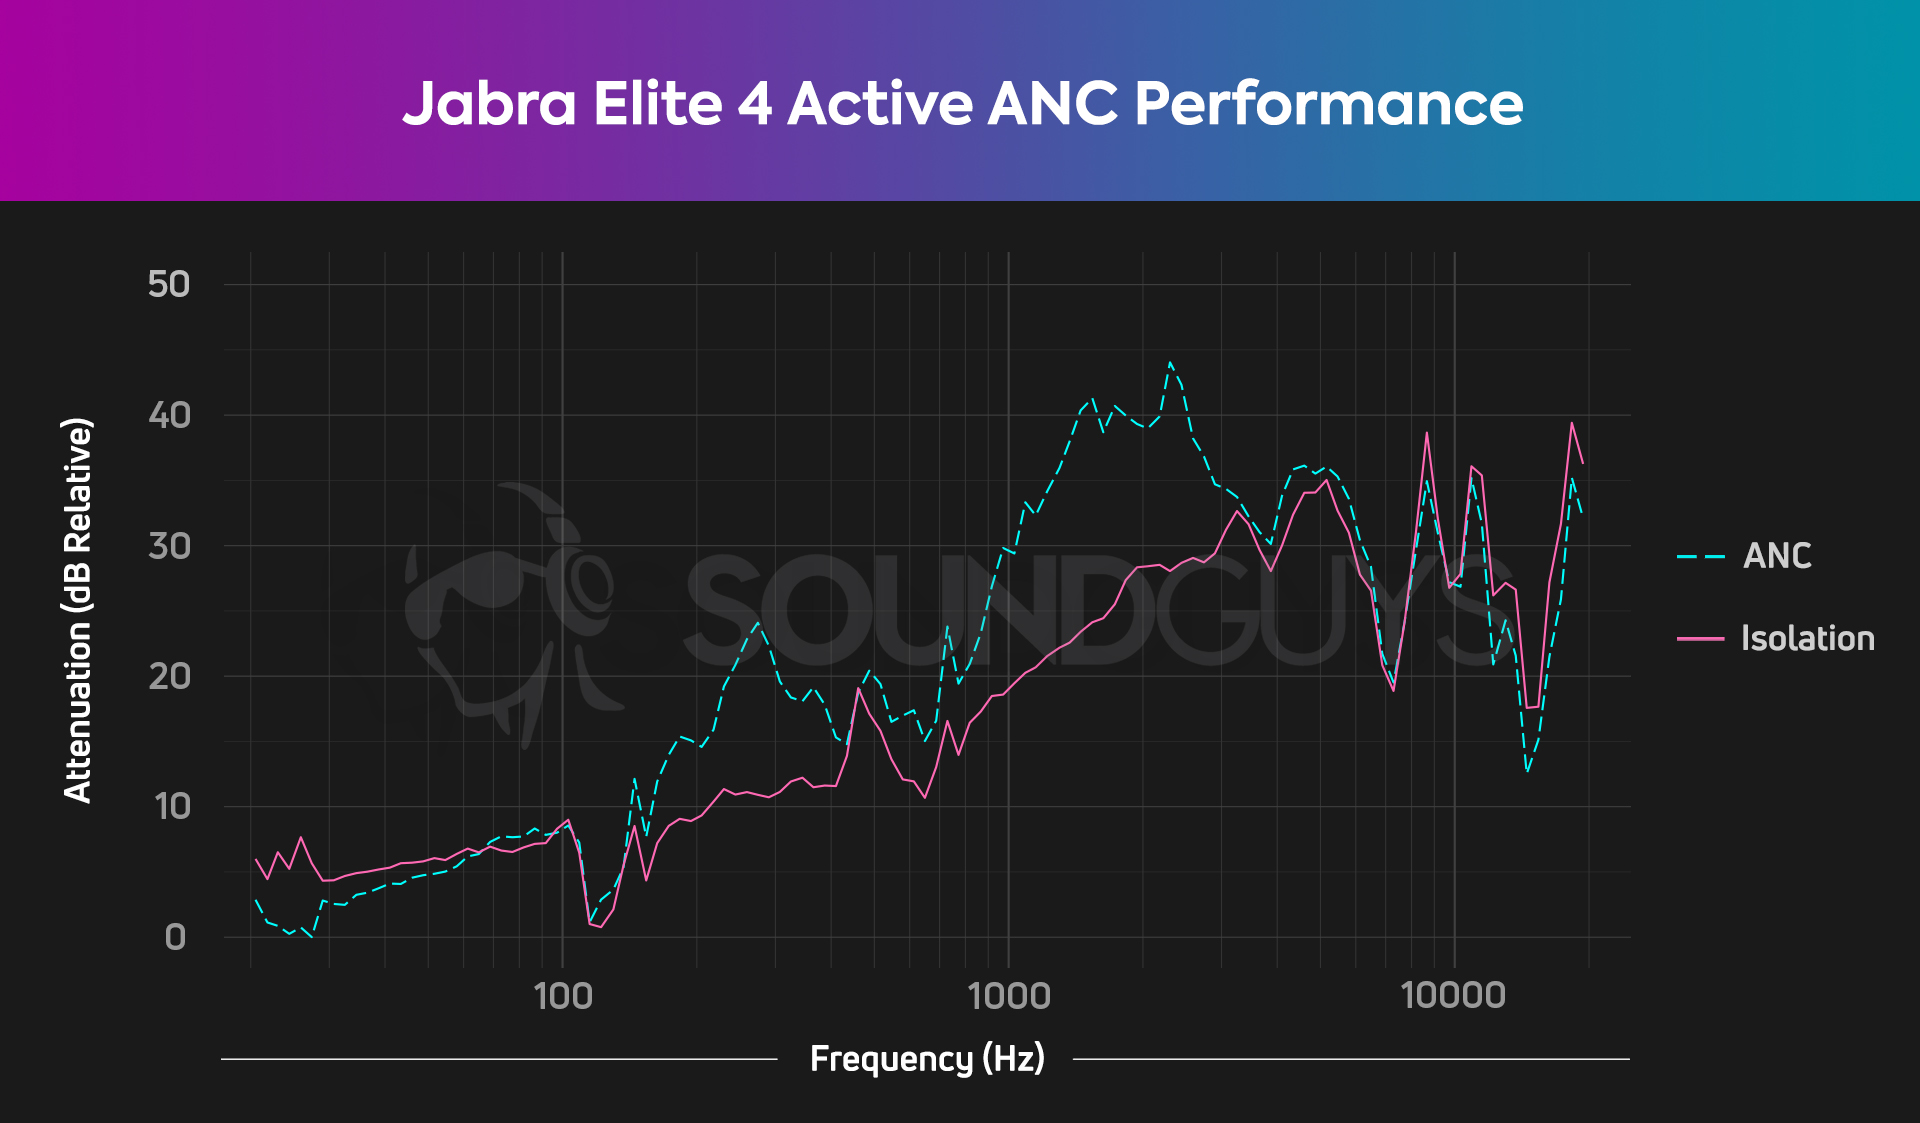 A chart shows the strong isolation and ANC performance of the Jabra Elite 4 Active.